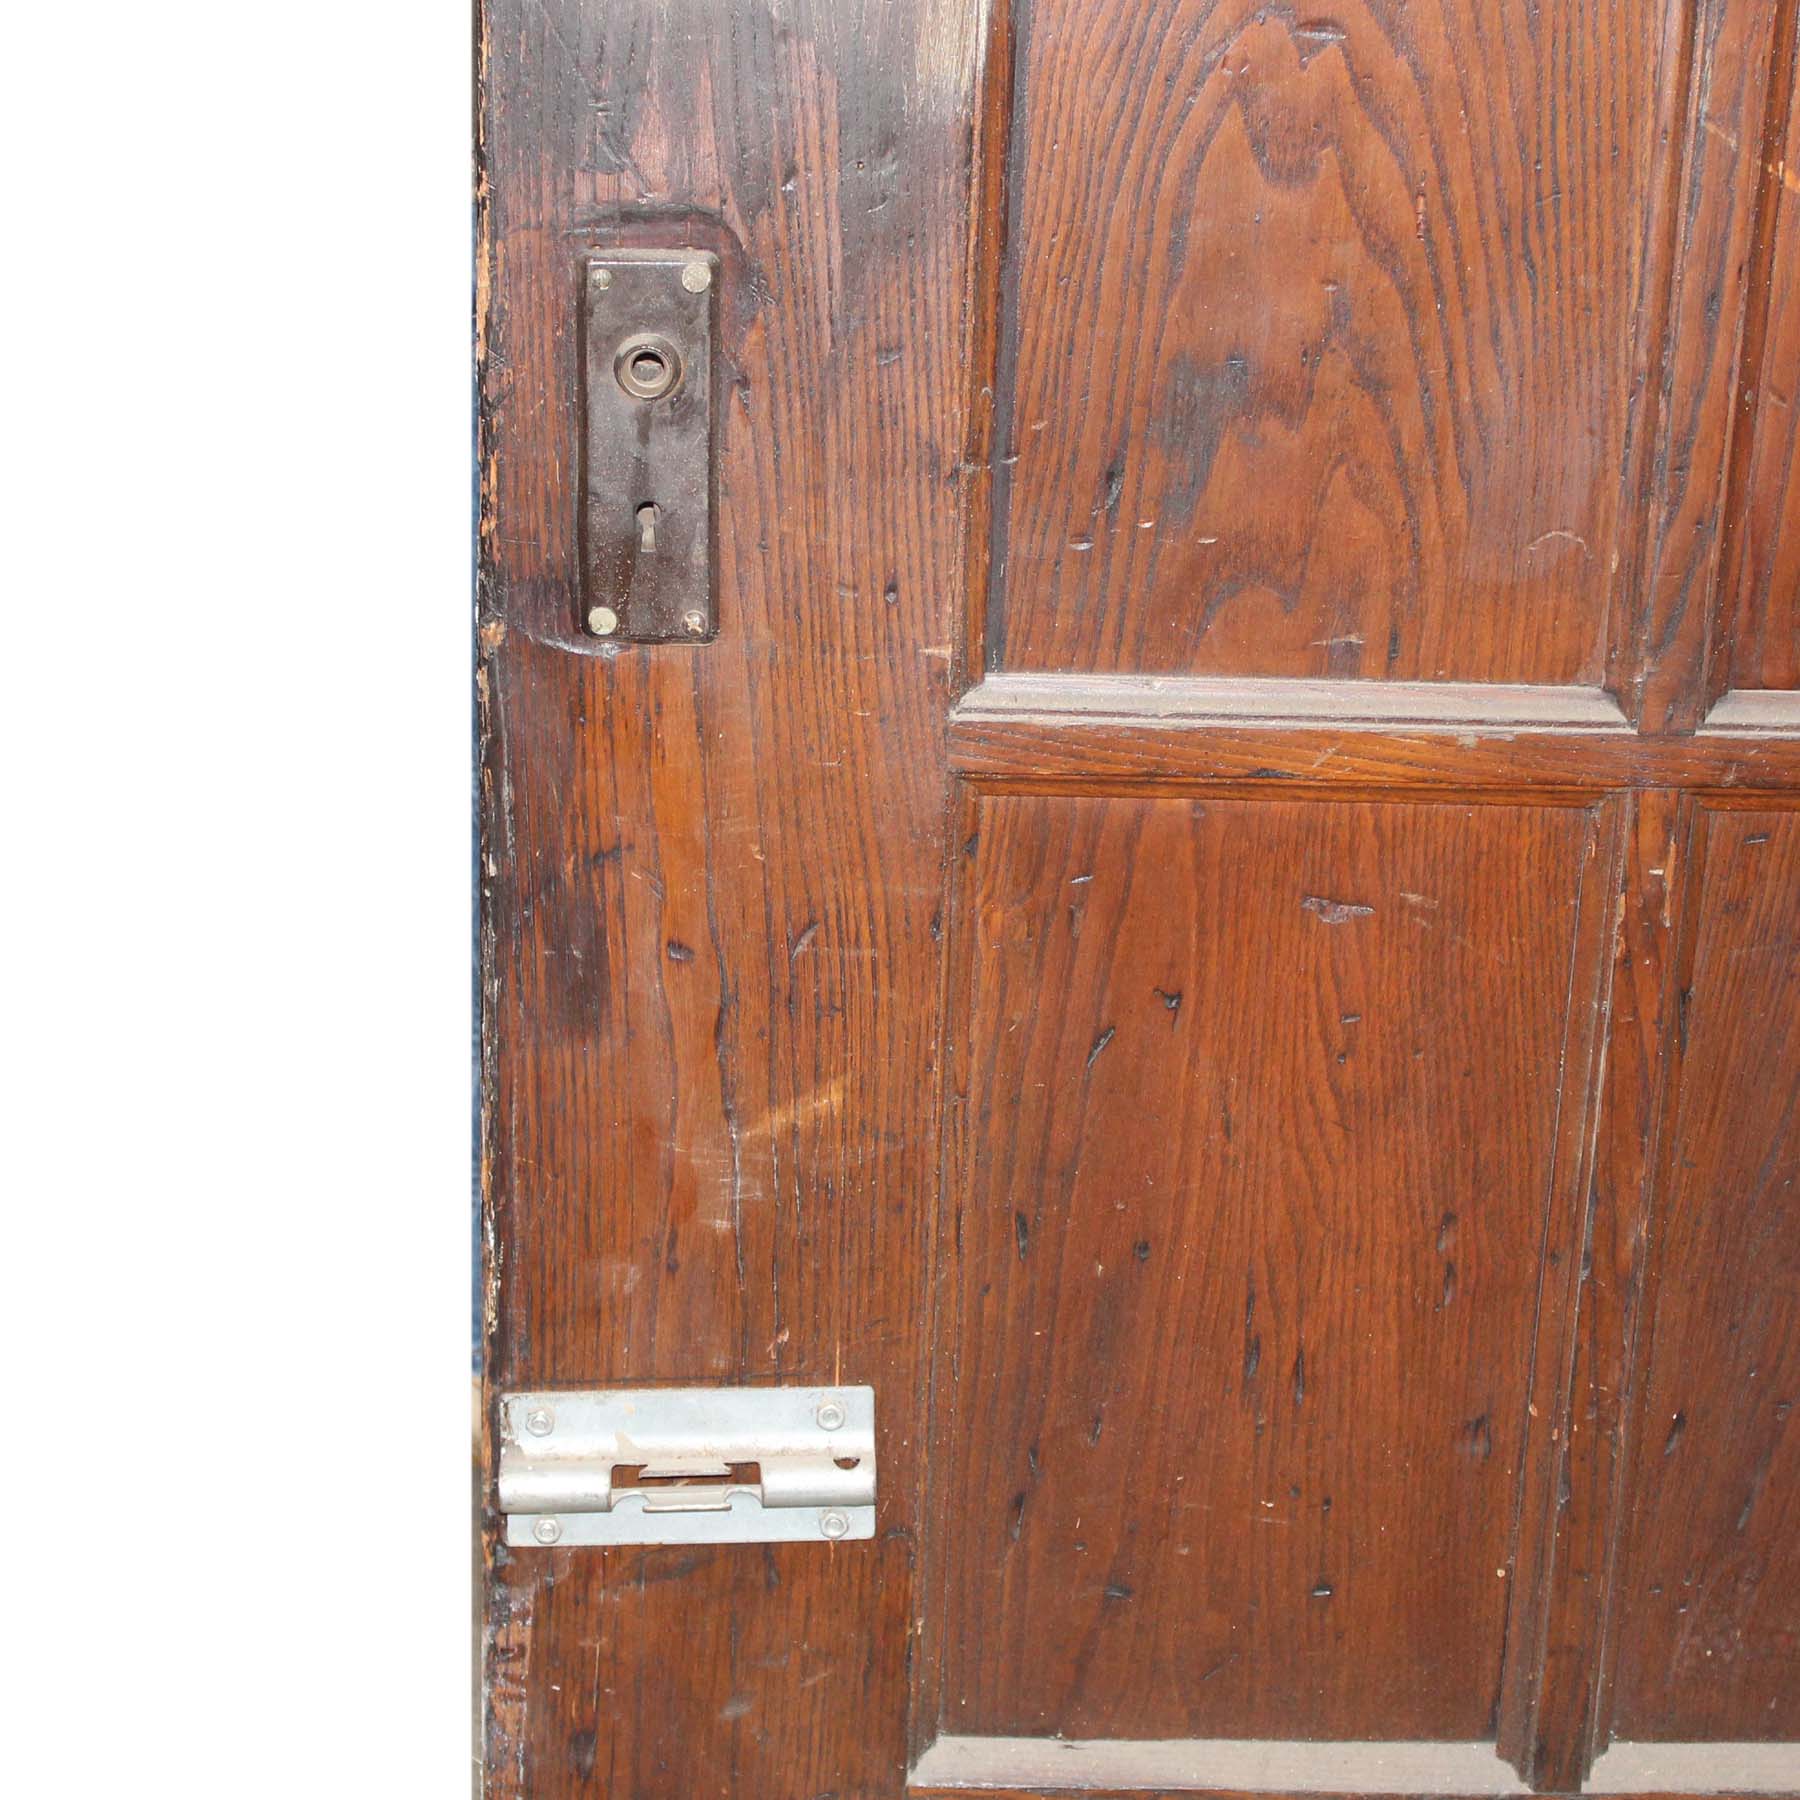 Substantial 47” Salvaged Oak Door with Gothic Arch Window-70322